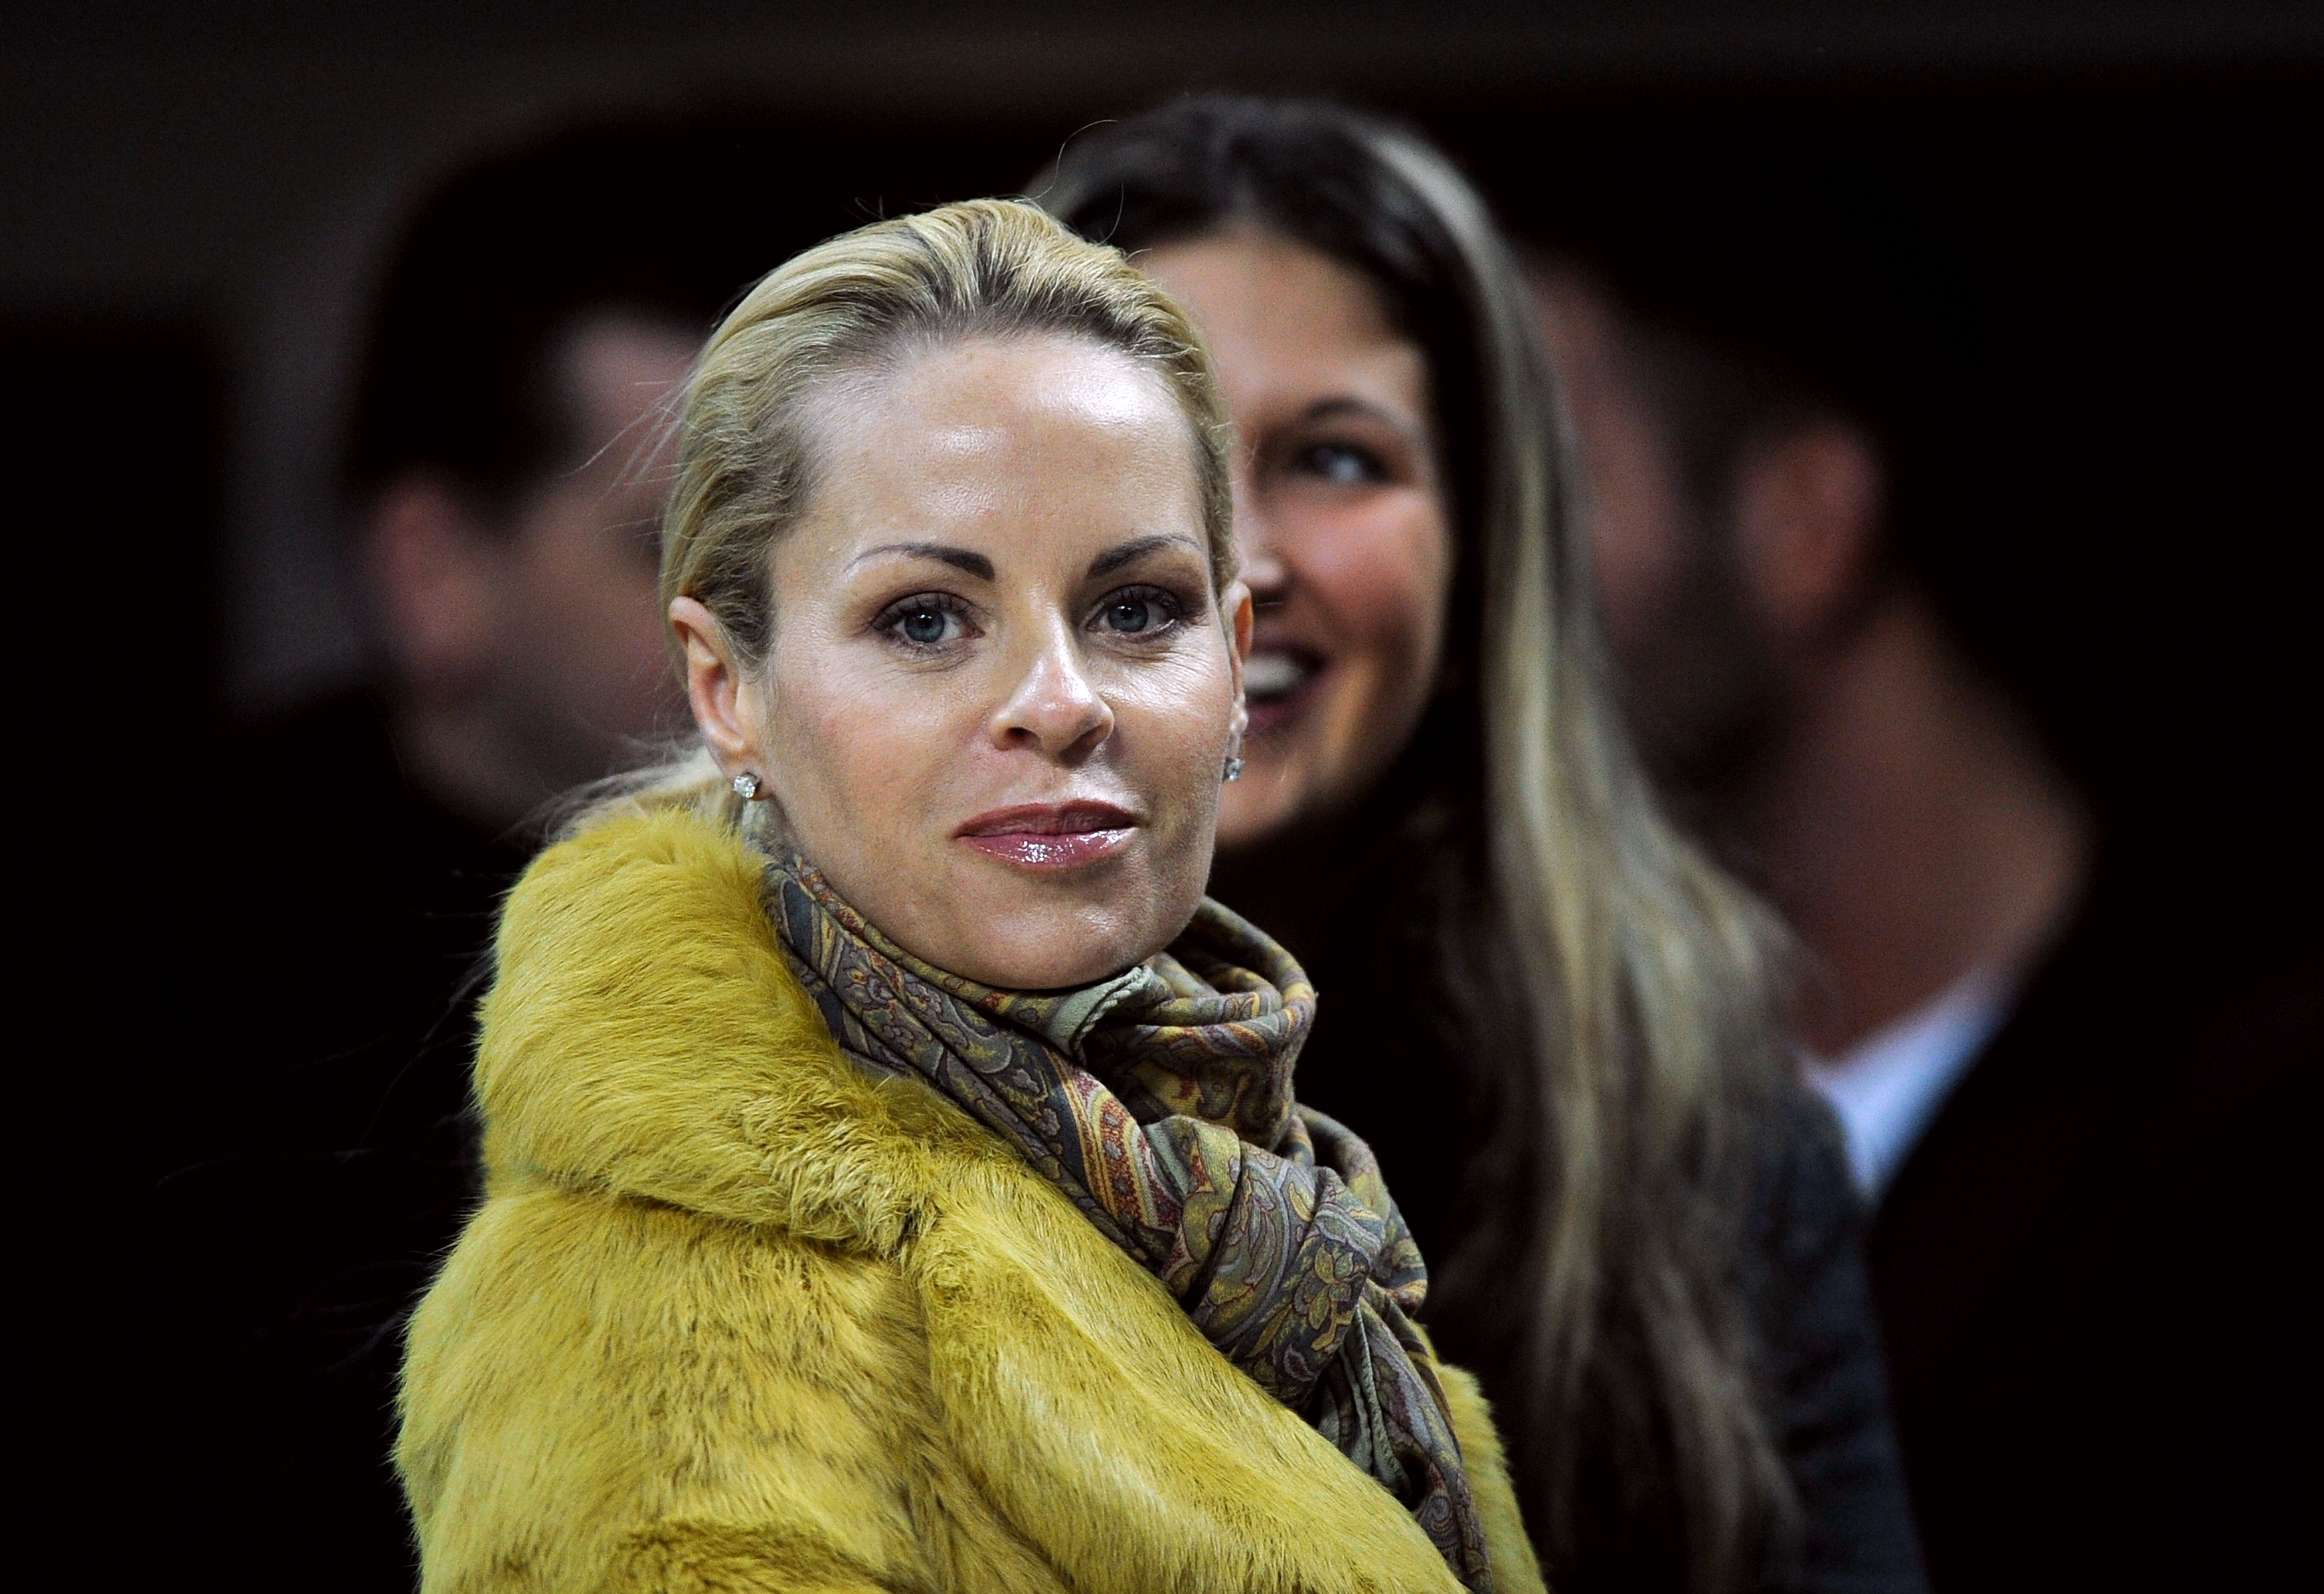 Helena Seger takes place in the stand before the Italian serie A football match opposing AC Milan and Fiorentina at San Siro Stadium on November 20, 2010, in Milan. | Source: Getty Images